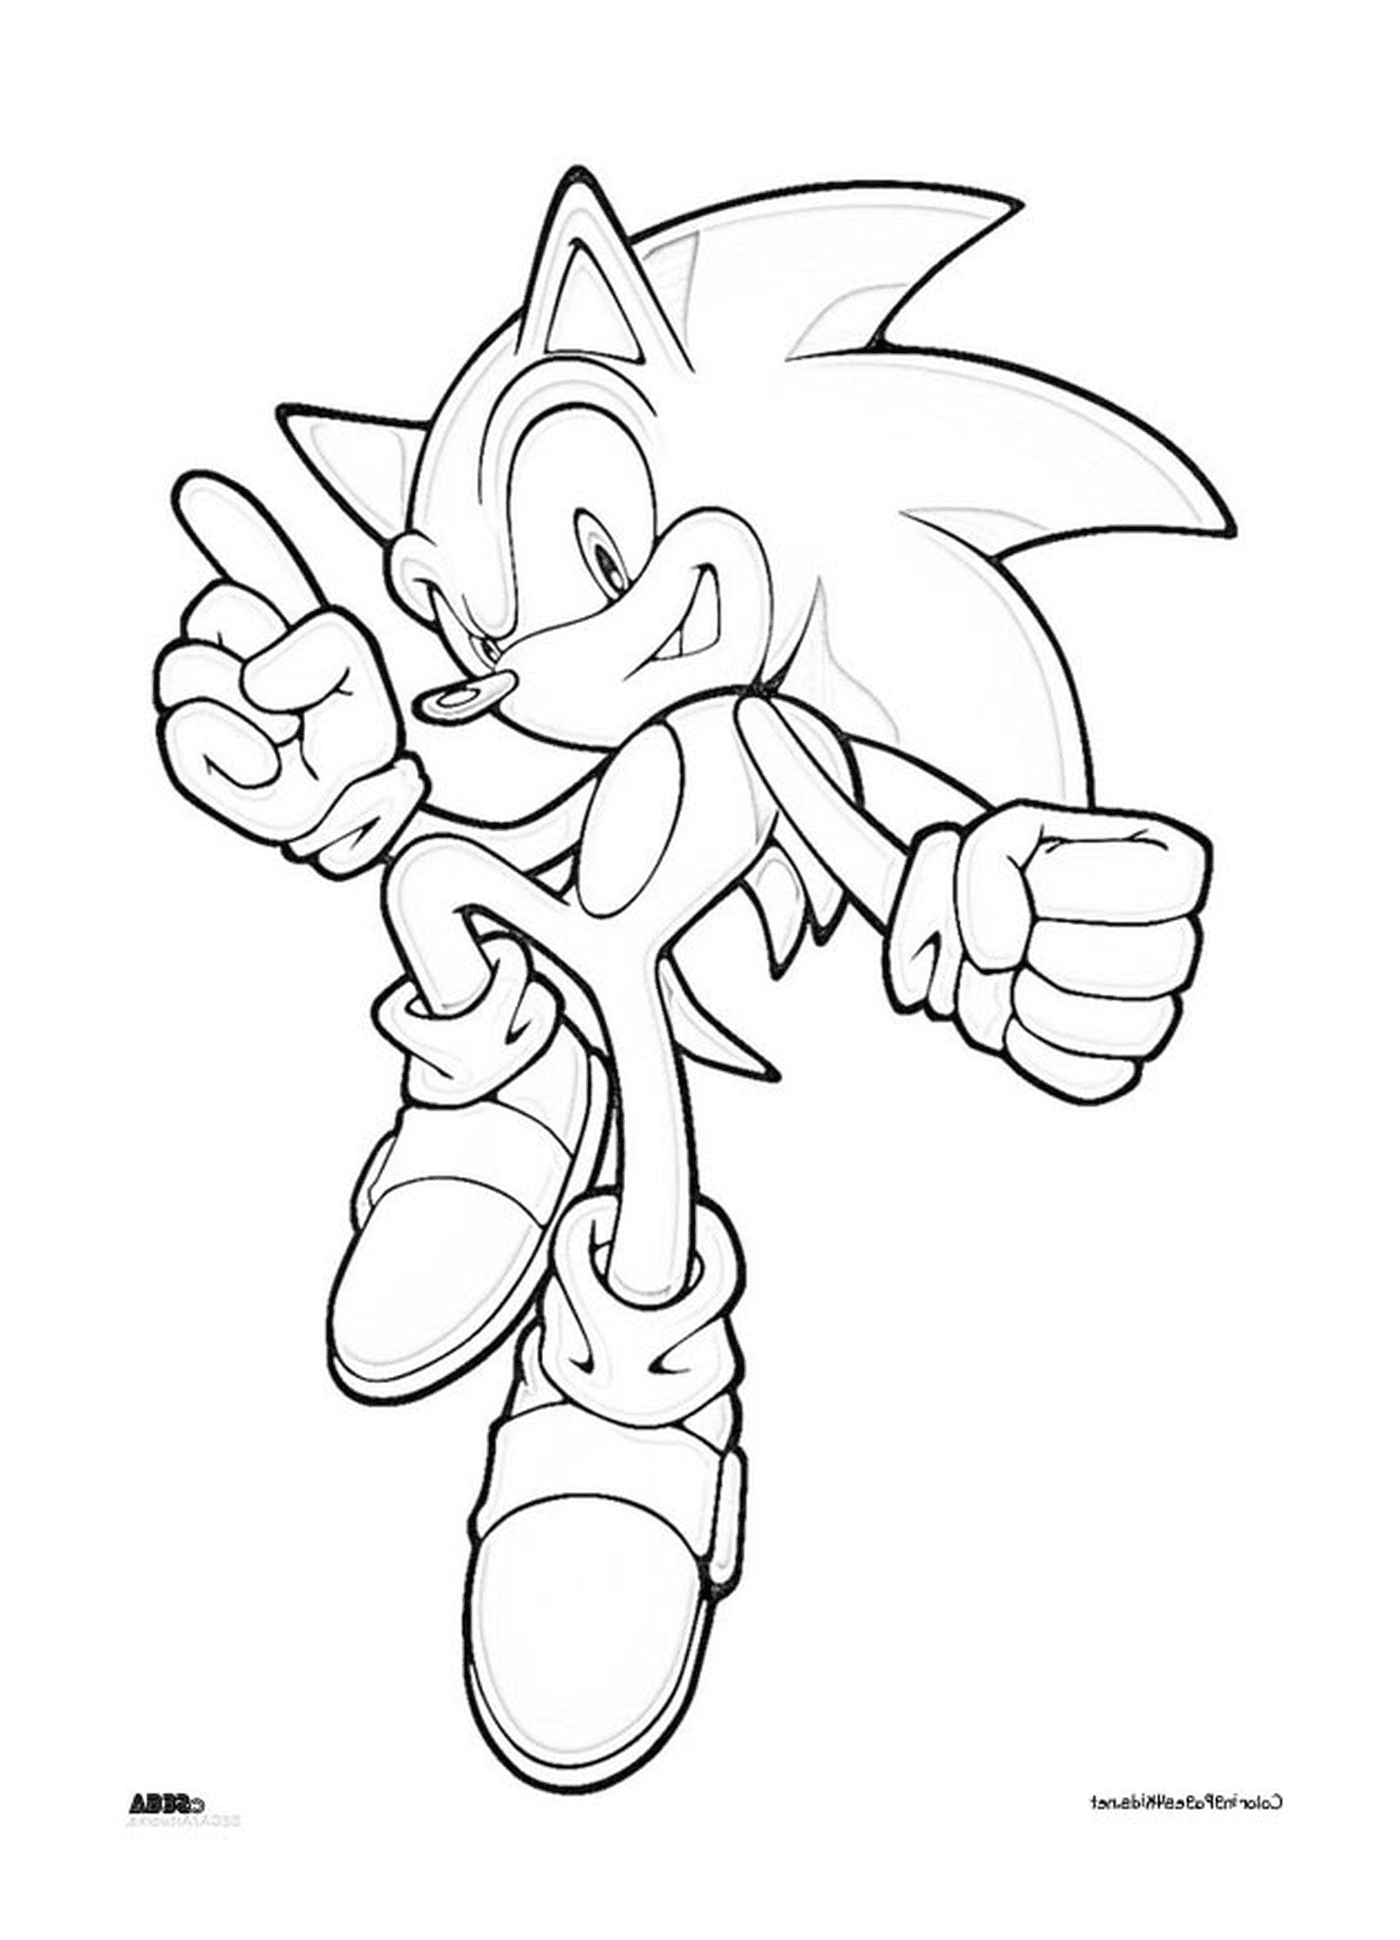  Sonic to print 